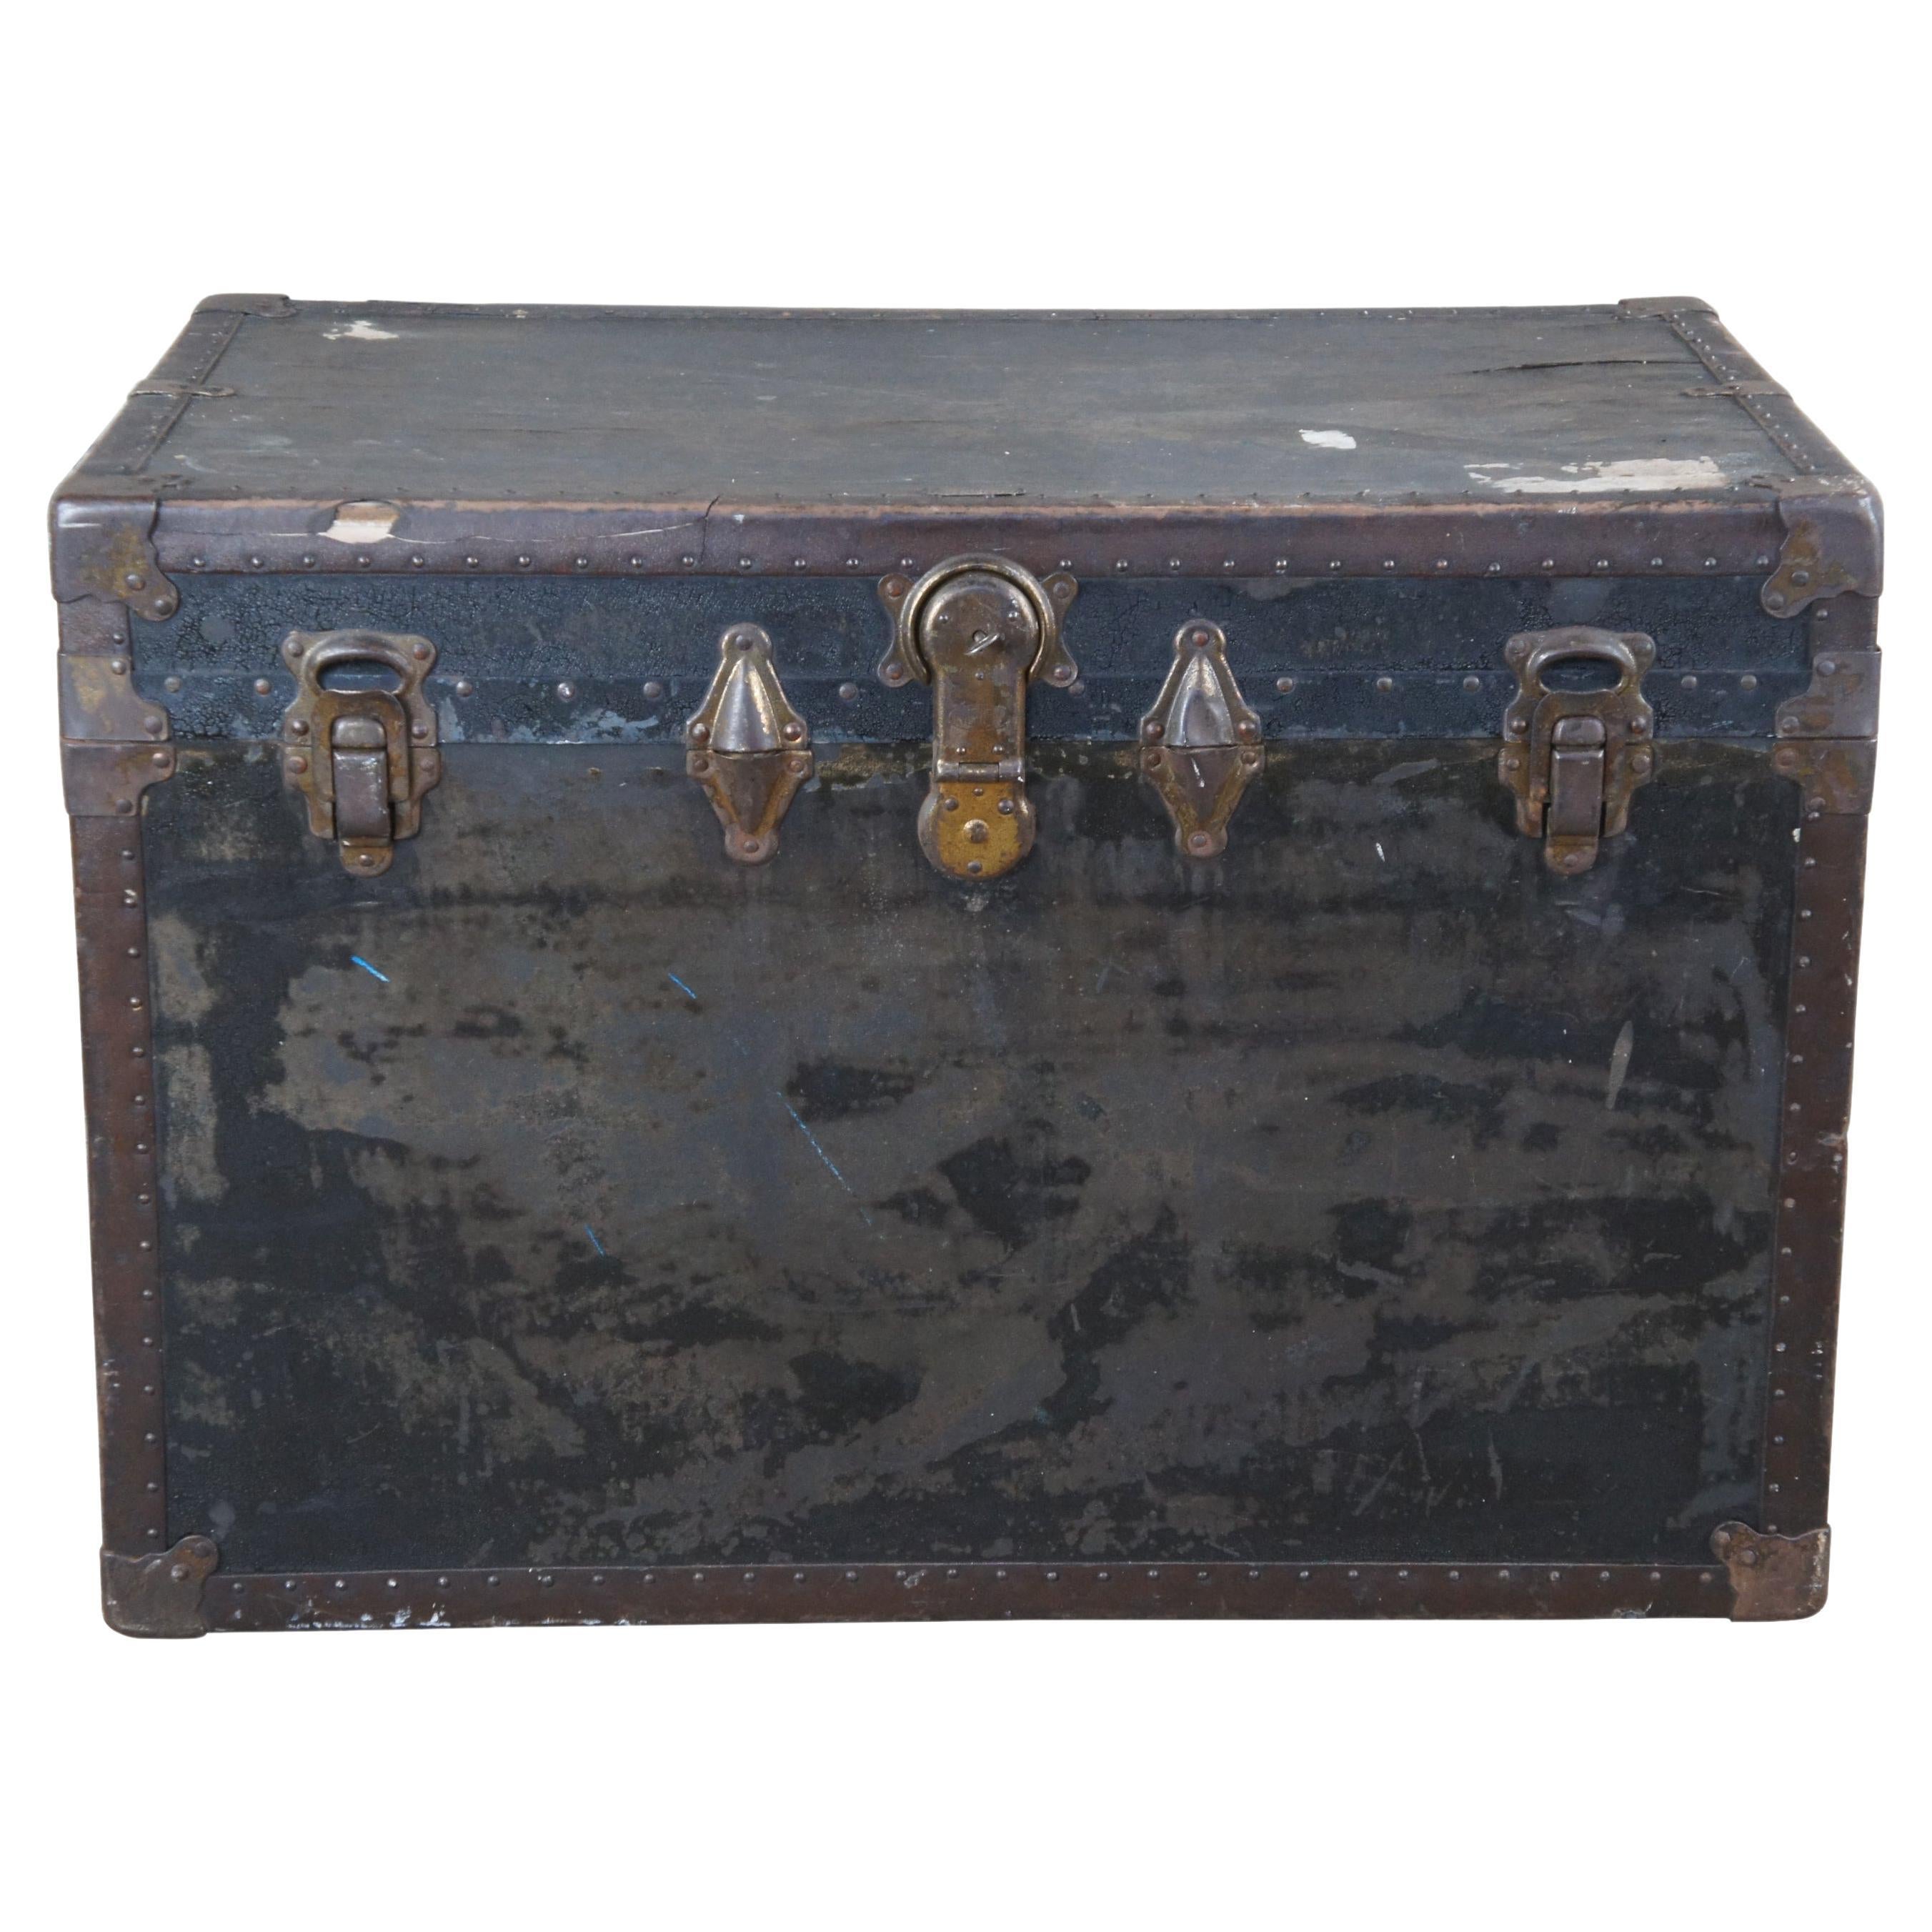 STARBAY SURCOUF LARGE STEAMER TRUNK AT HOME BAR WITH GLASSES CHAMPAGNE  BUCKET - Royal House Antiques